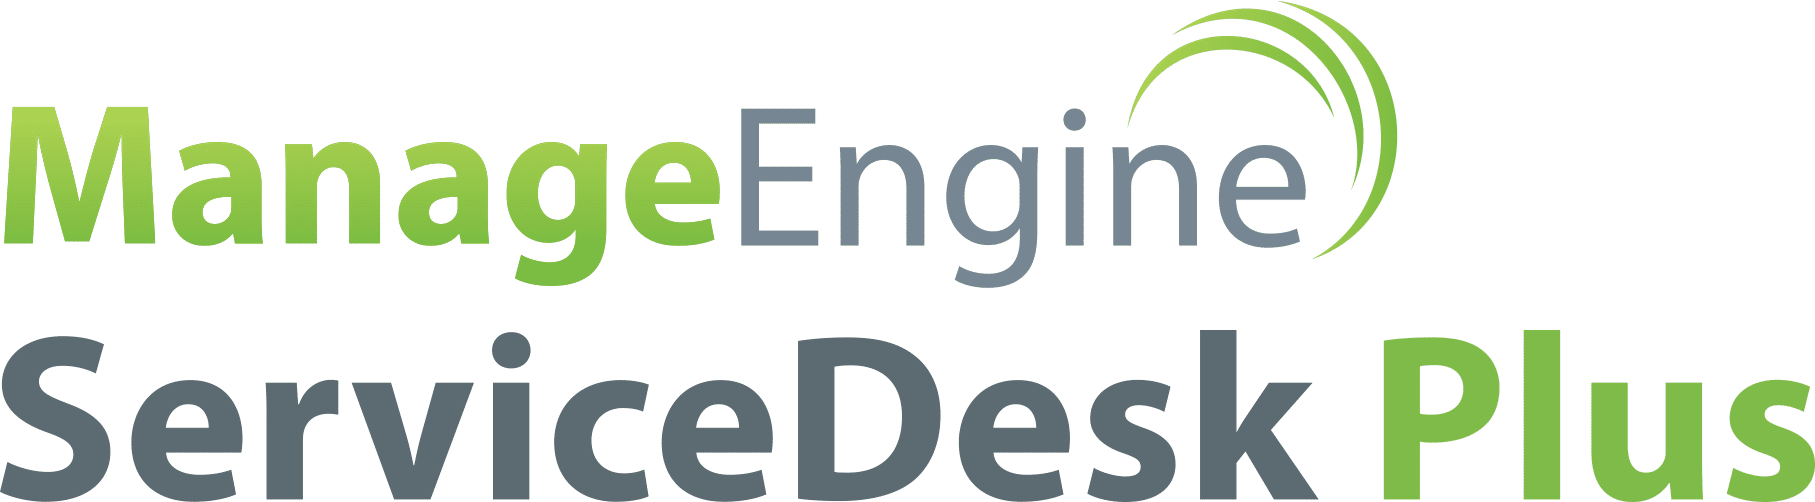 Manageengine Servicedesk Plus Pricing Reviews And Features April